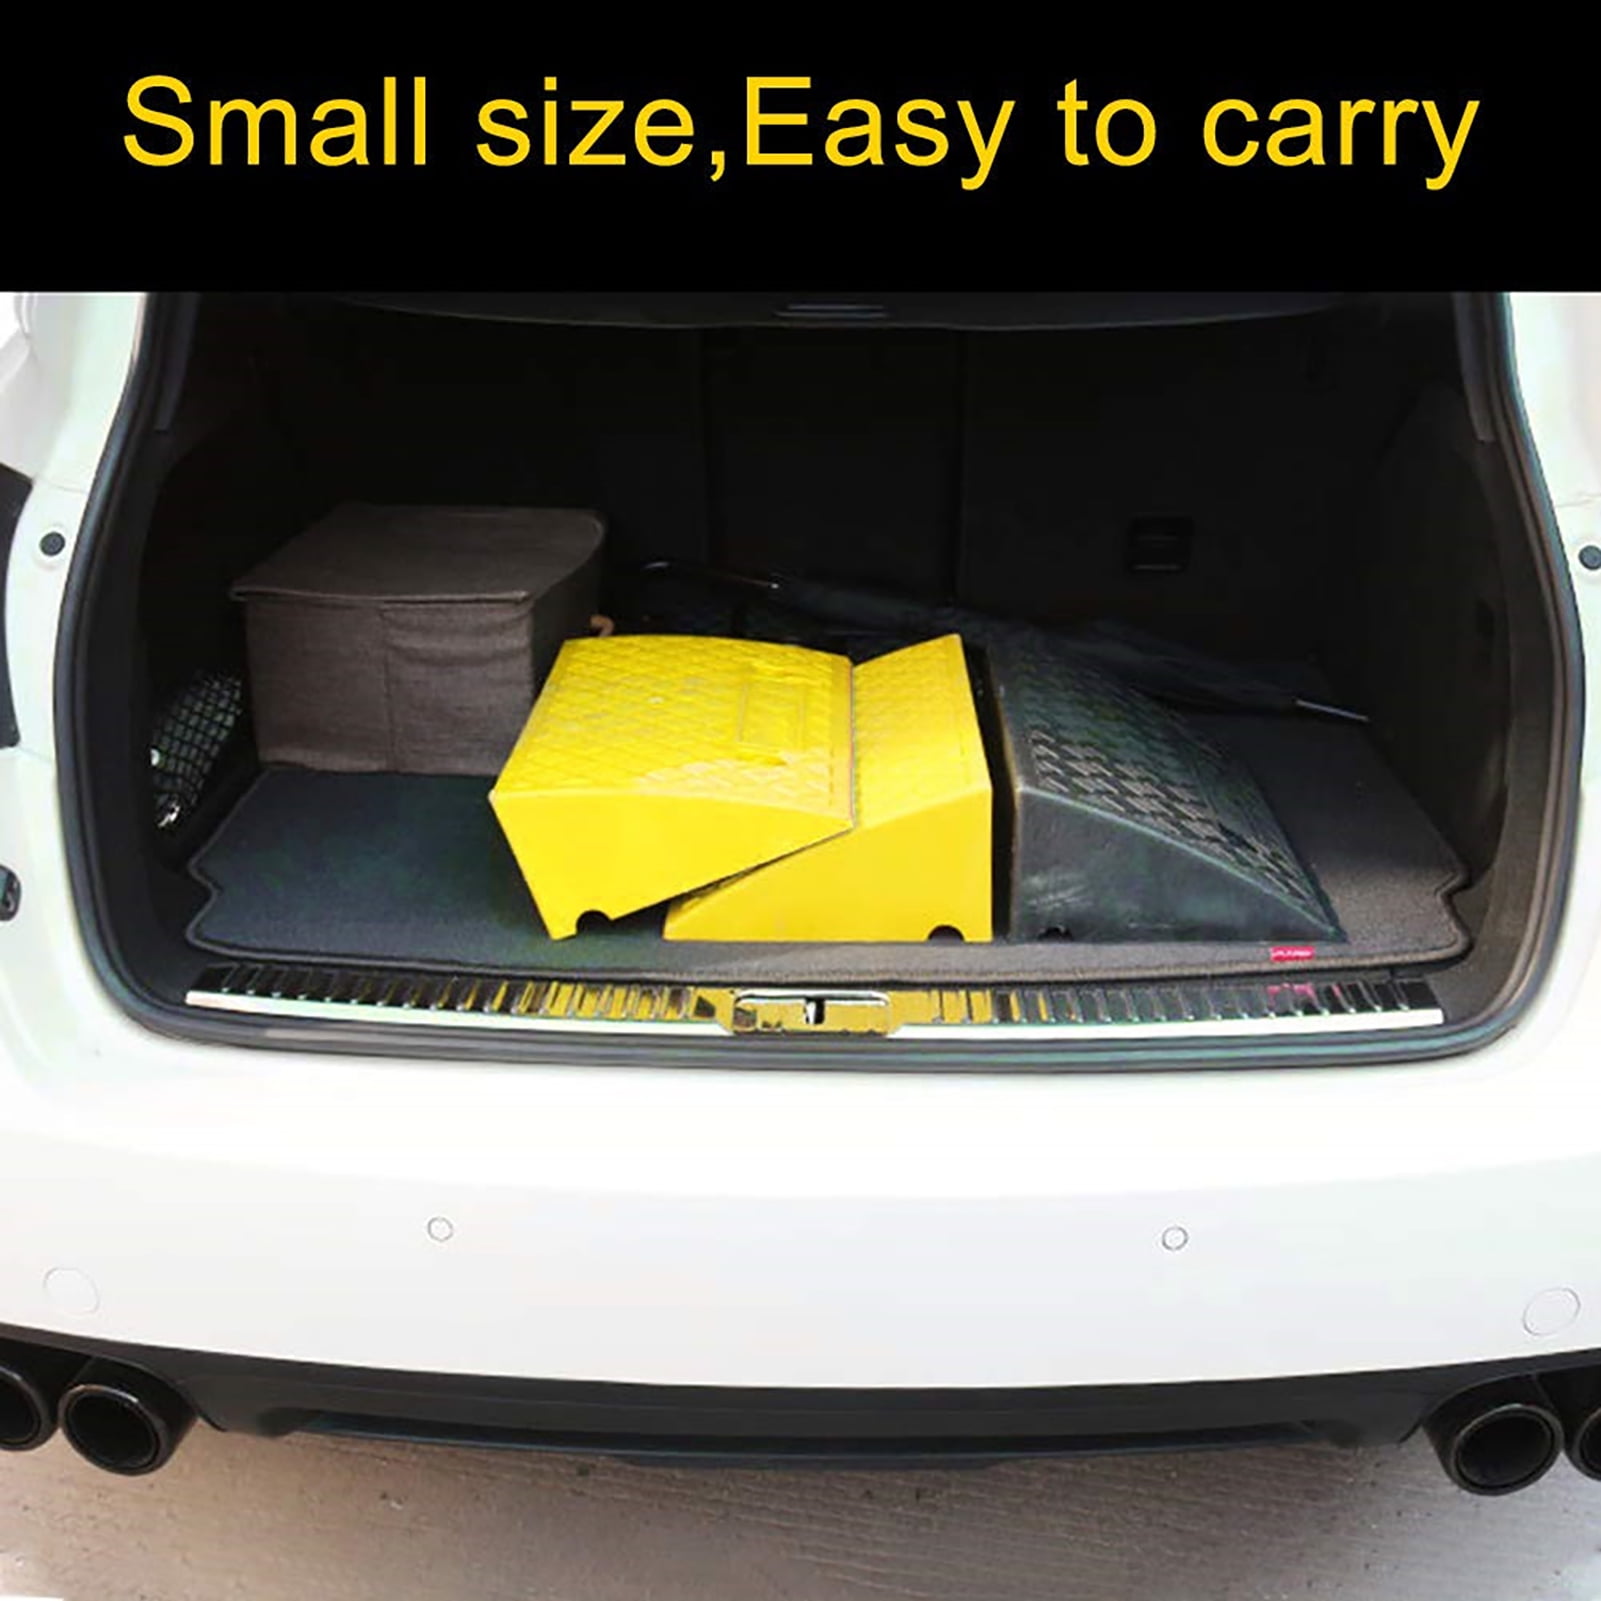 Zhou-WD Lightweight Ramps Plastic Steps Mats Hotel Luggage Carts Ramps Portable Ramps for Adult Bicycle Multiple Size car ramps Color : Yellow, Size : 502713CM Scooter